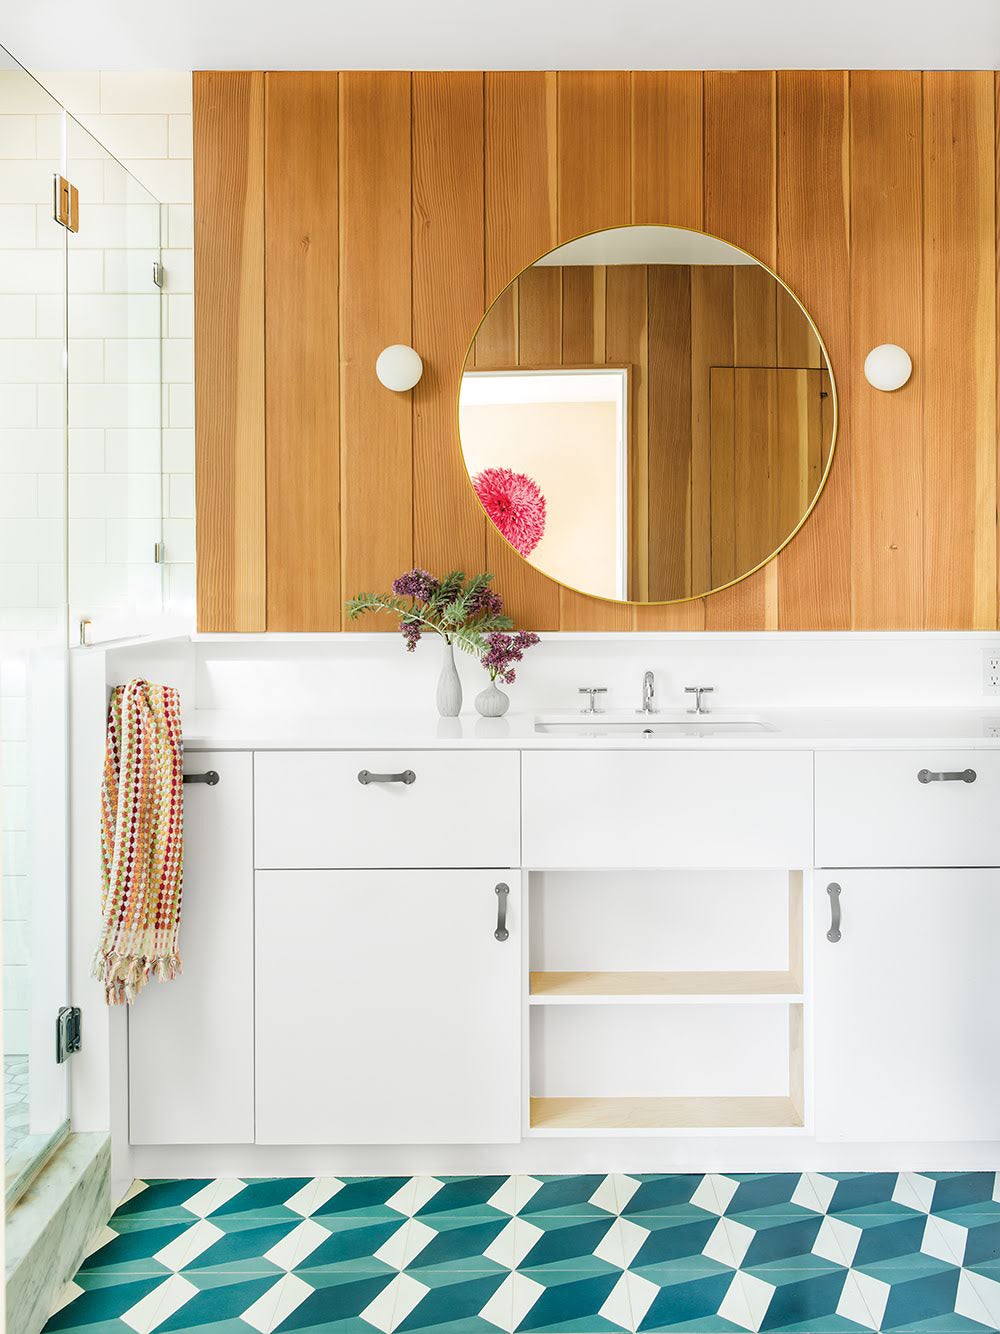 Bathroom with round mirror, wood paneled walls, and geometric tile.